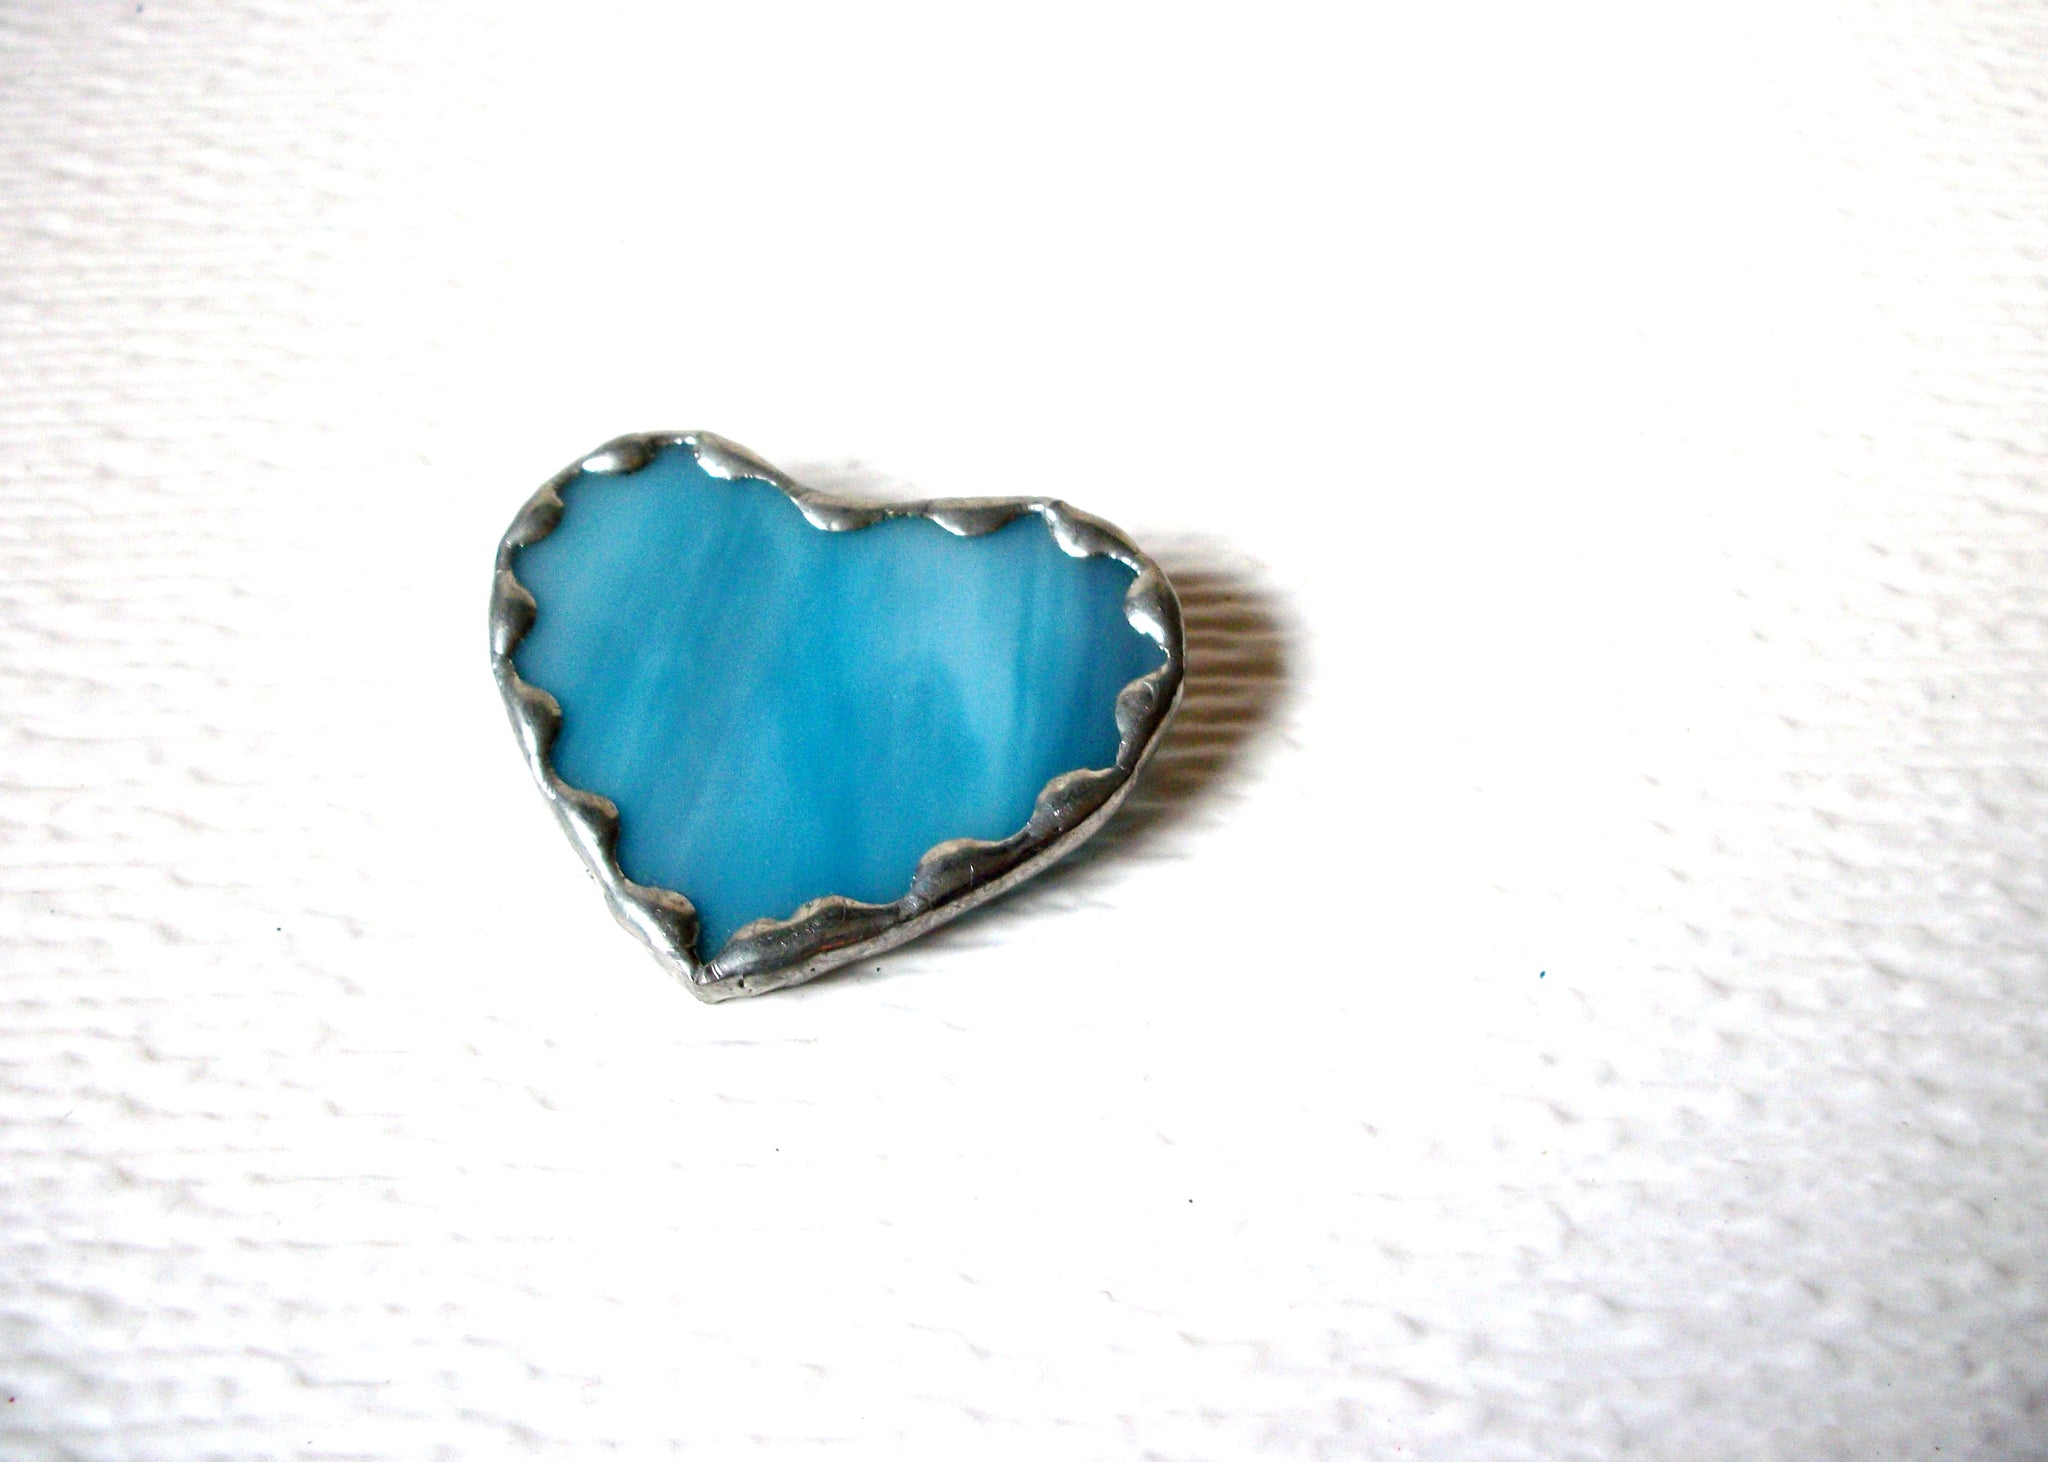 Frosted Blue Glass Silver Toned Vintage Heart Brooch Pin 122220